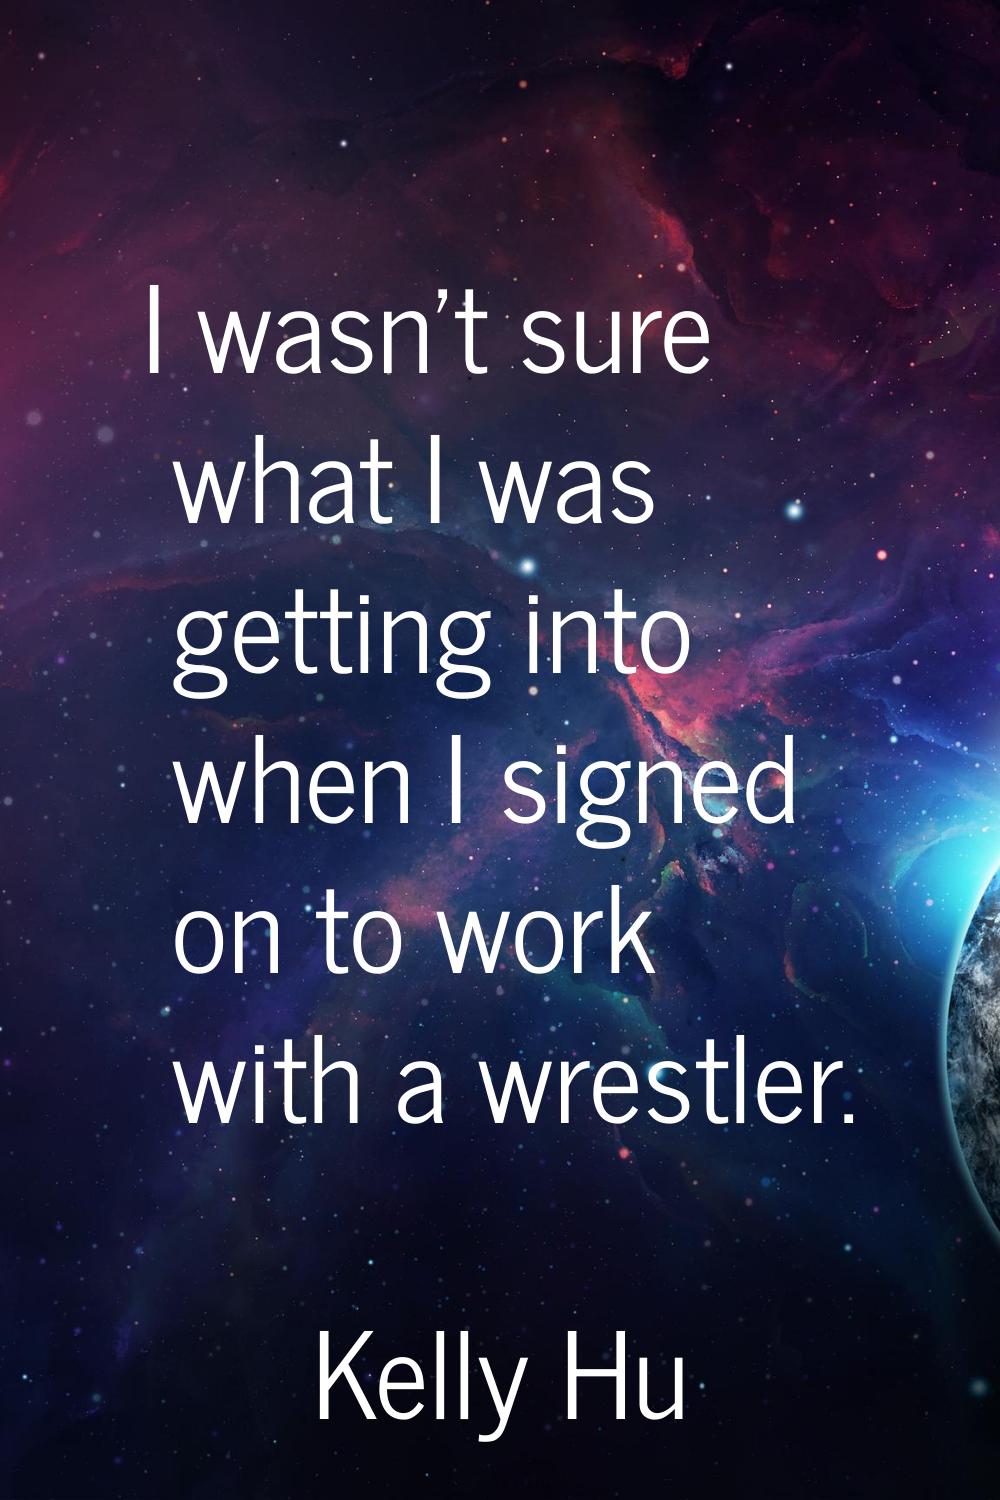 I wasn't sure what I was getting into when I signed on to work with a wrestler.